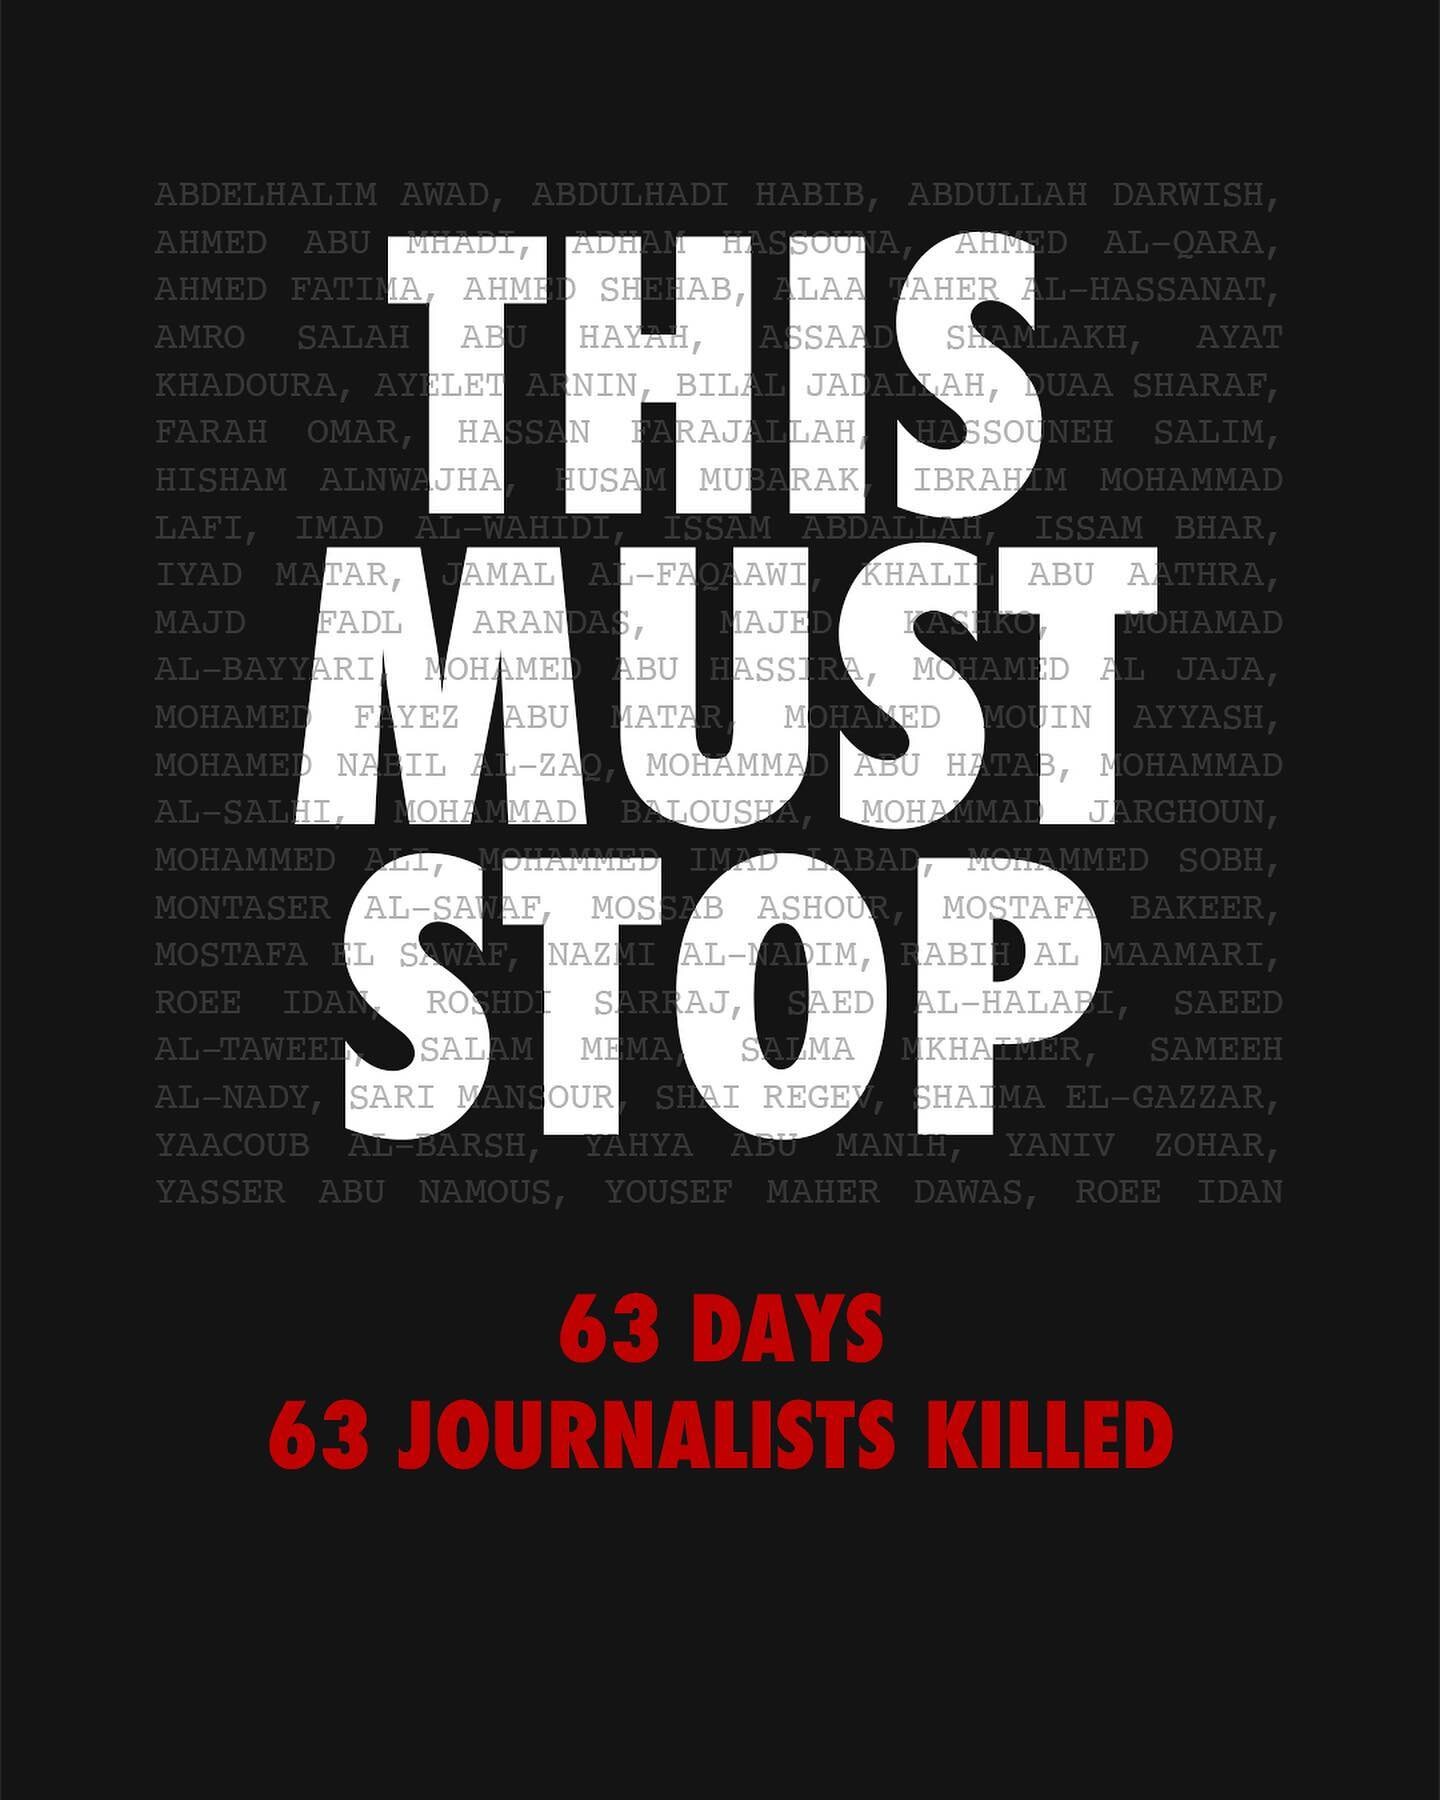 900+ journalists and media workers demand an end to the killing of journalists in gaza and the wider region. for more information on how to sign on and get involved, see the link in my bio.

#ceasefirenow #thismuststop